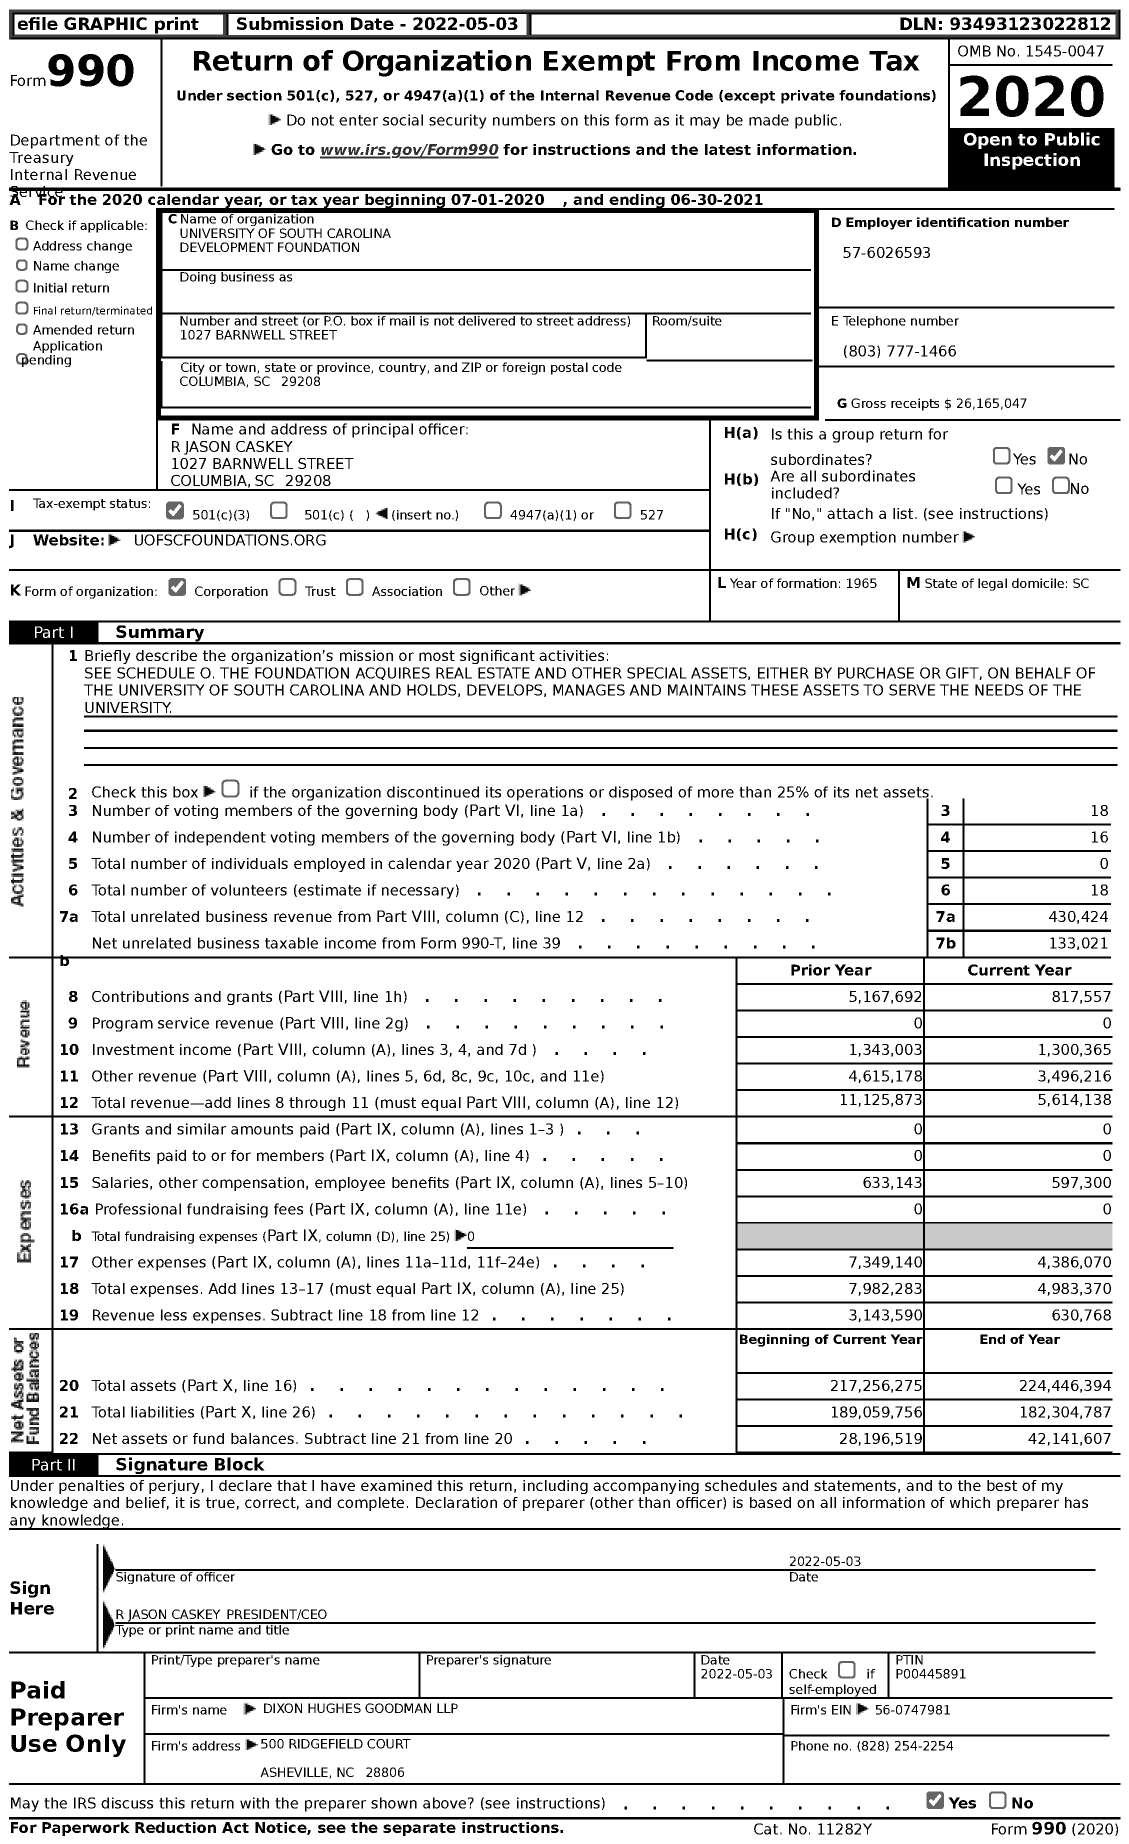 Image of first page of 2020 Form 990 for University of South Carolina Development Foundation